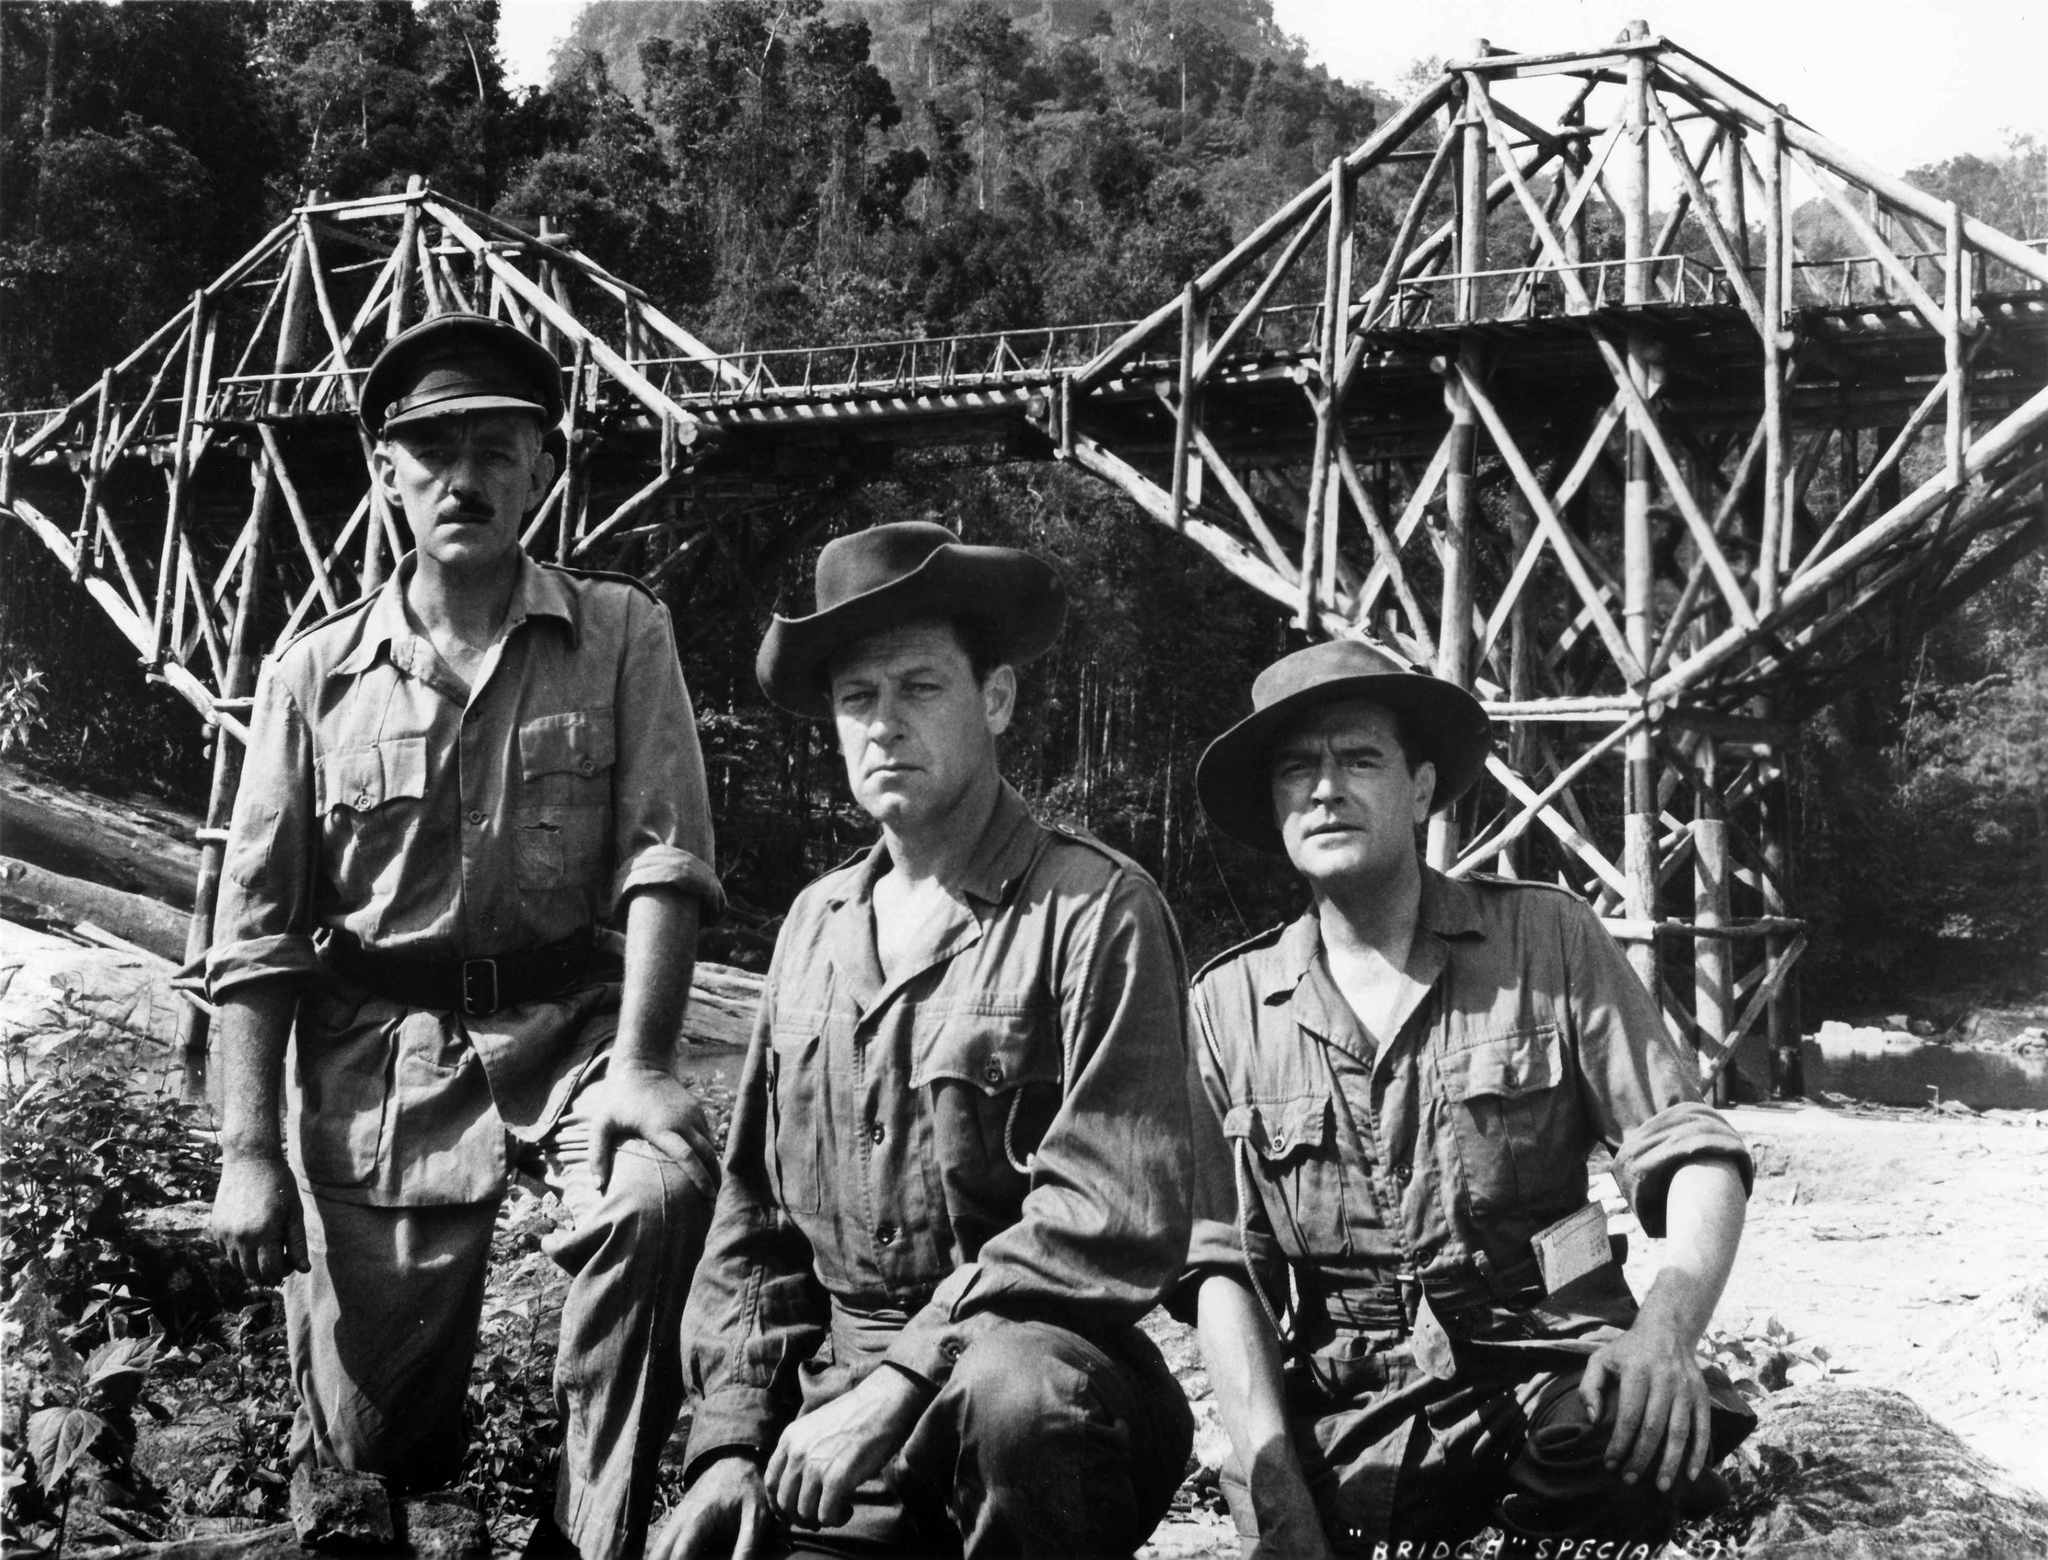 Still of Alec Guinness, William Holden and Jack Hawkins in The Bridge on the River Kwai (1957)